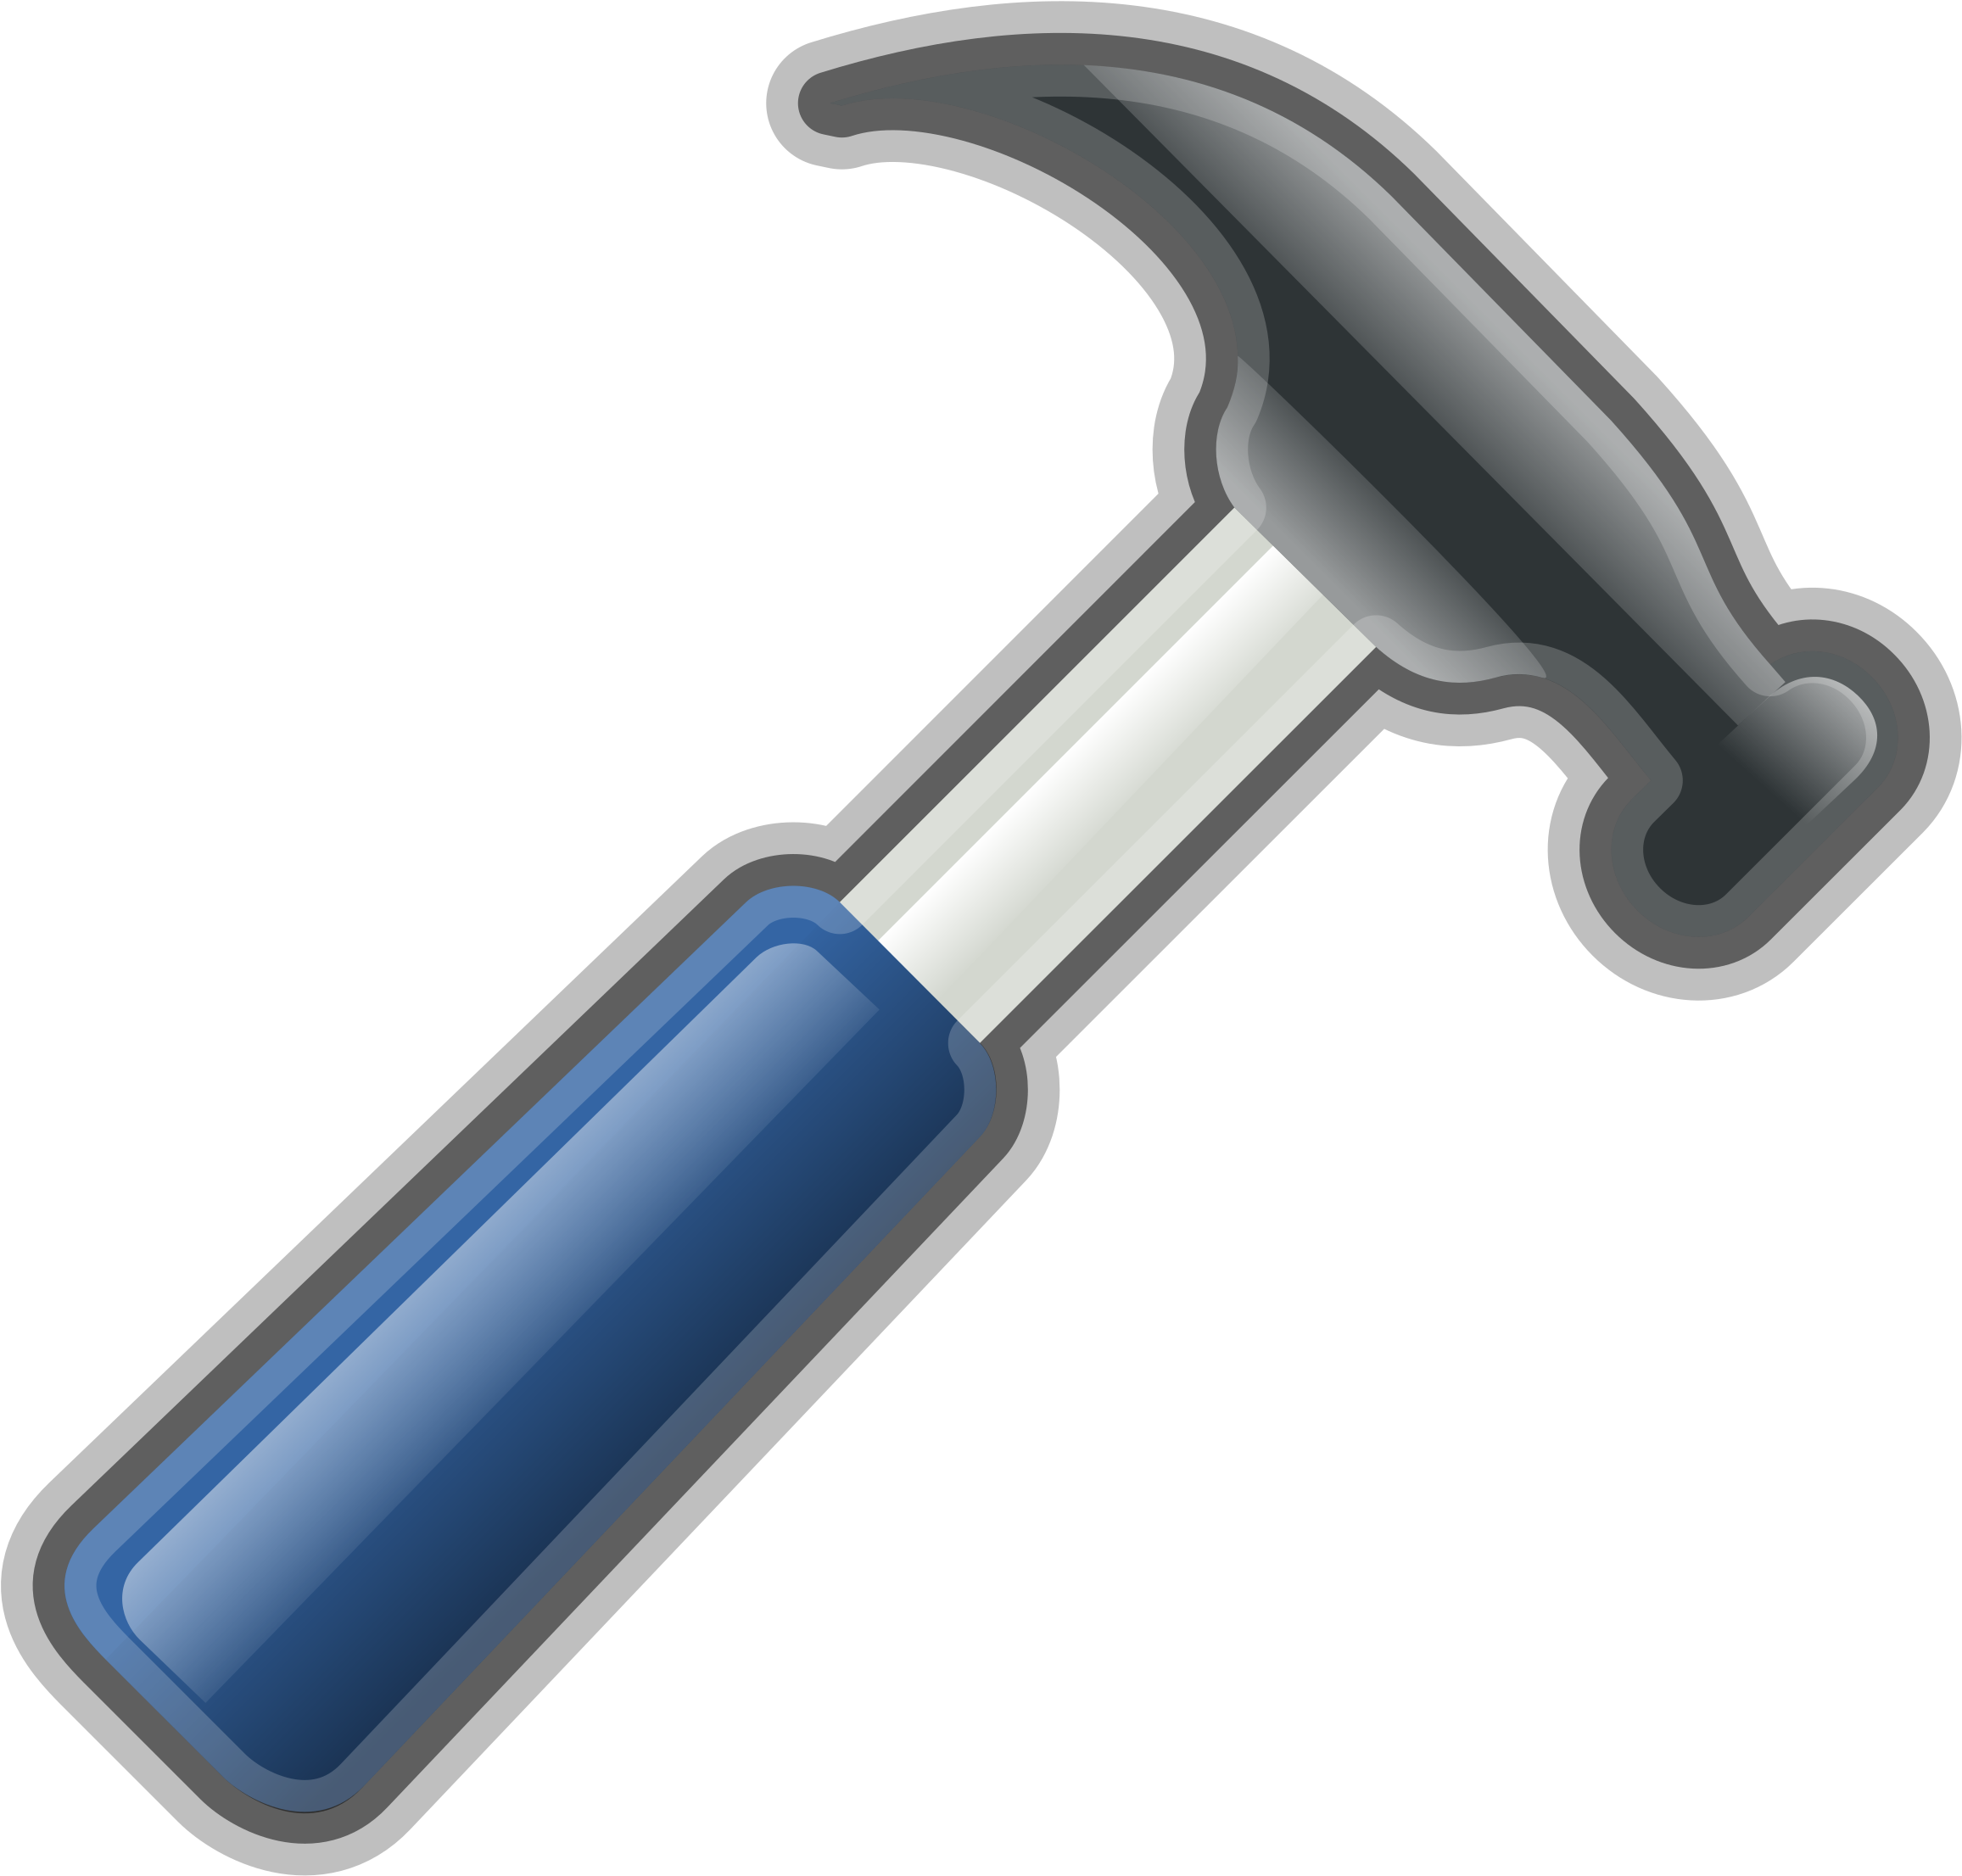 Hammer Free To Use Cliparts - Hammer Clip Art (2400x2400)